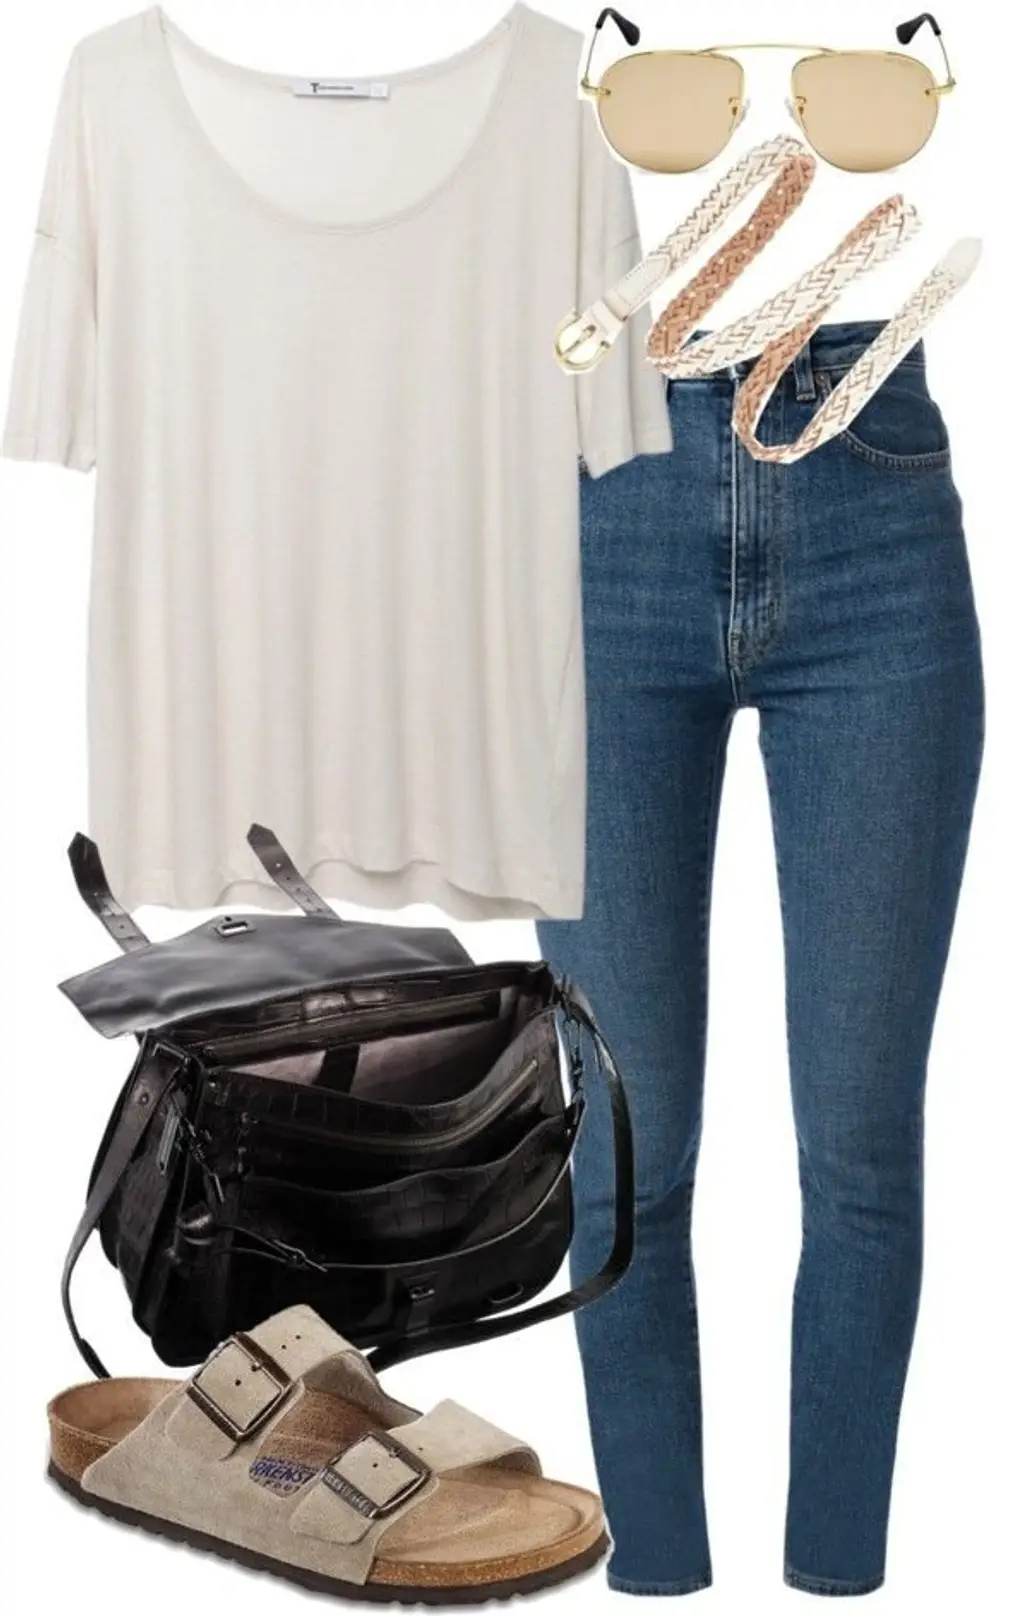 Leaving on a Jet Plane? You'll Love These Comfortably Chic Outfit Ideas ...